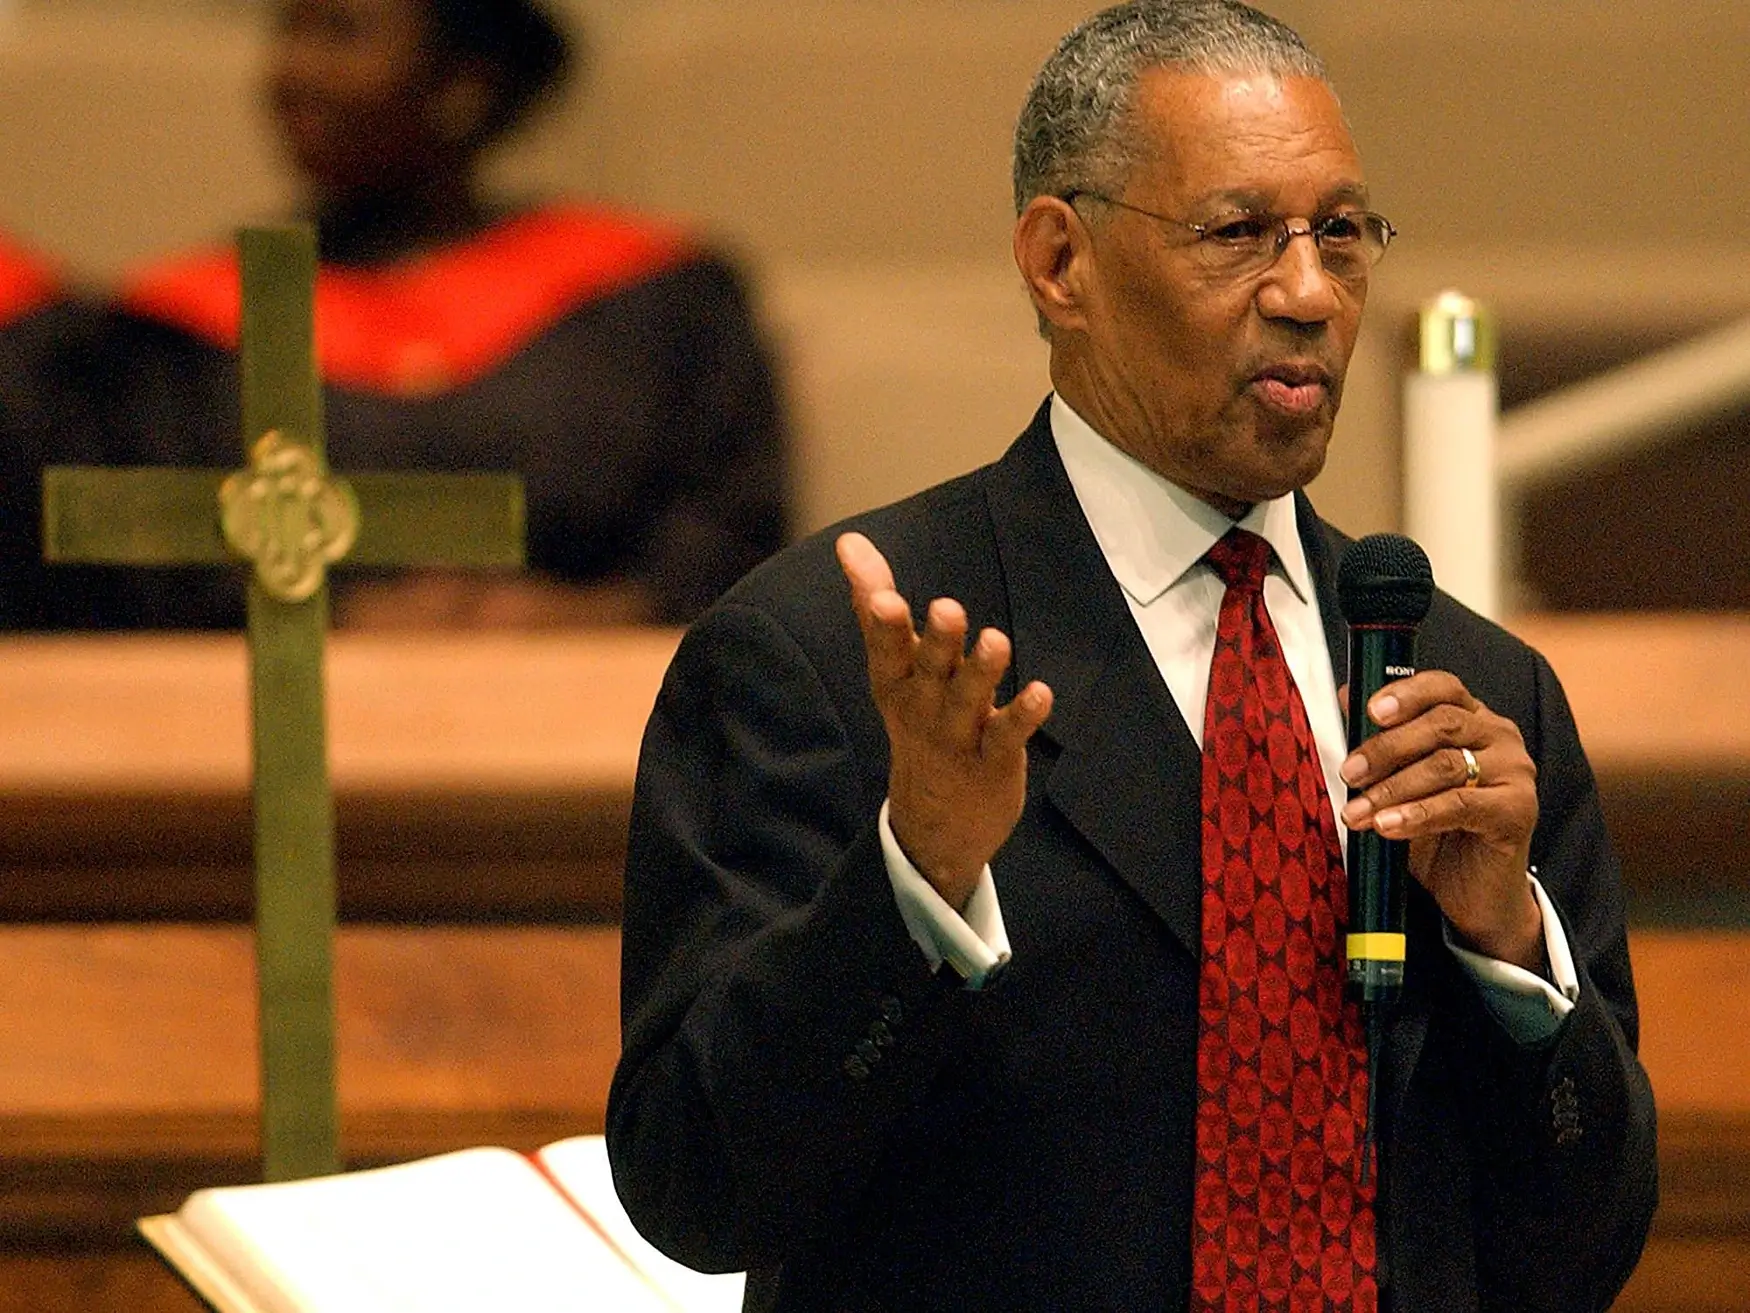 The Rev. William Lawson, of Wheeler Street Baptist Church in Houston, addresses an ecumenical service to commemorate the 50th anniversay of the Brown v. Board of Education Supreme Court decision Sunday, May 16, 2004, at First United Methodist Church in Topeka, Kan.